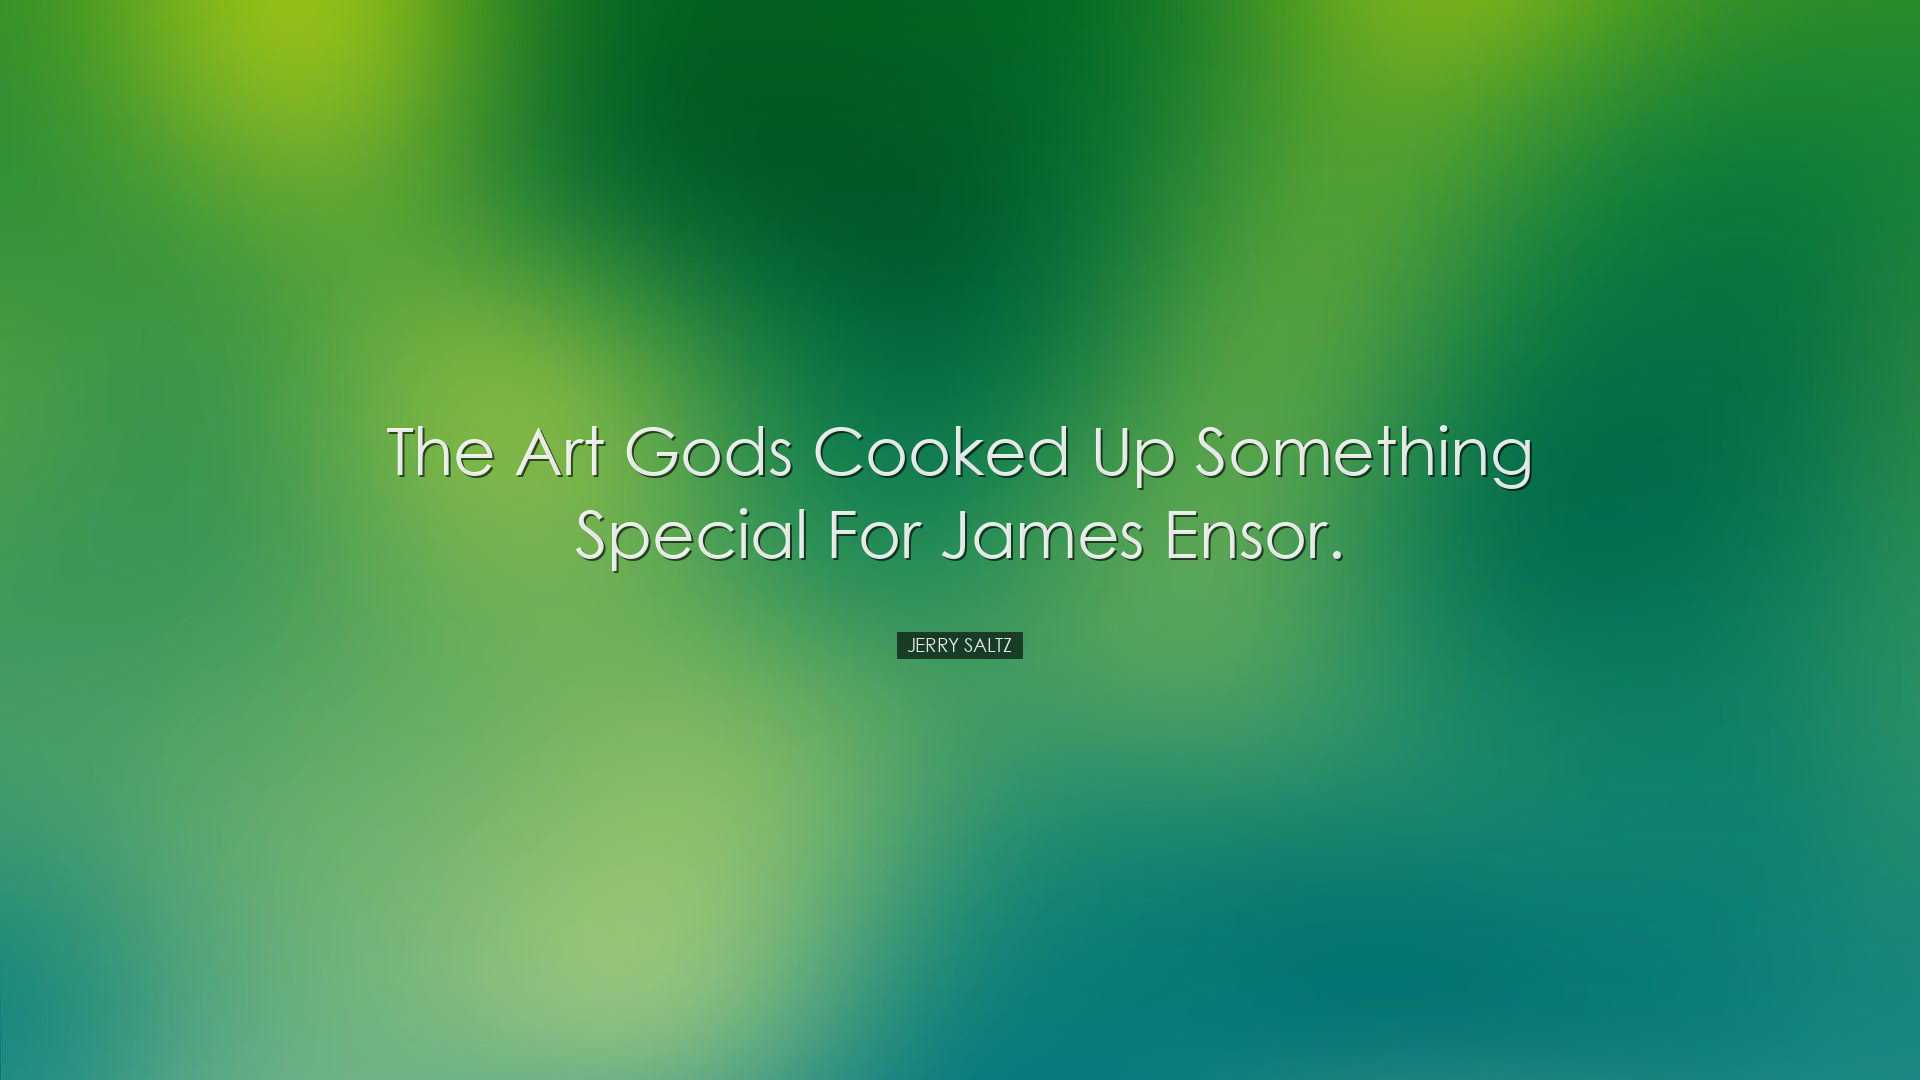 The art gods cooked up something special for James Ensor. - Jerry